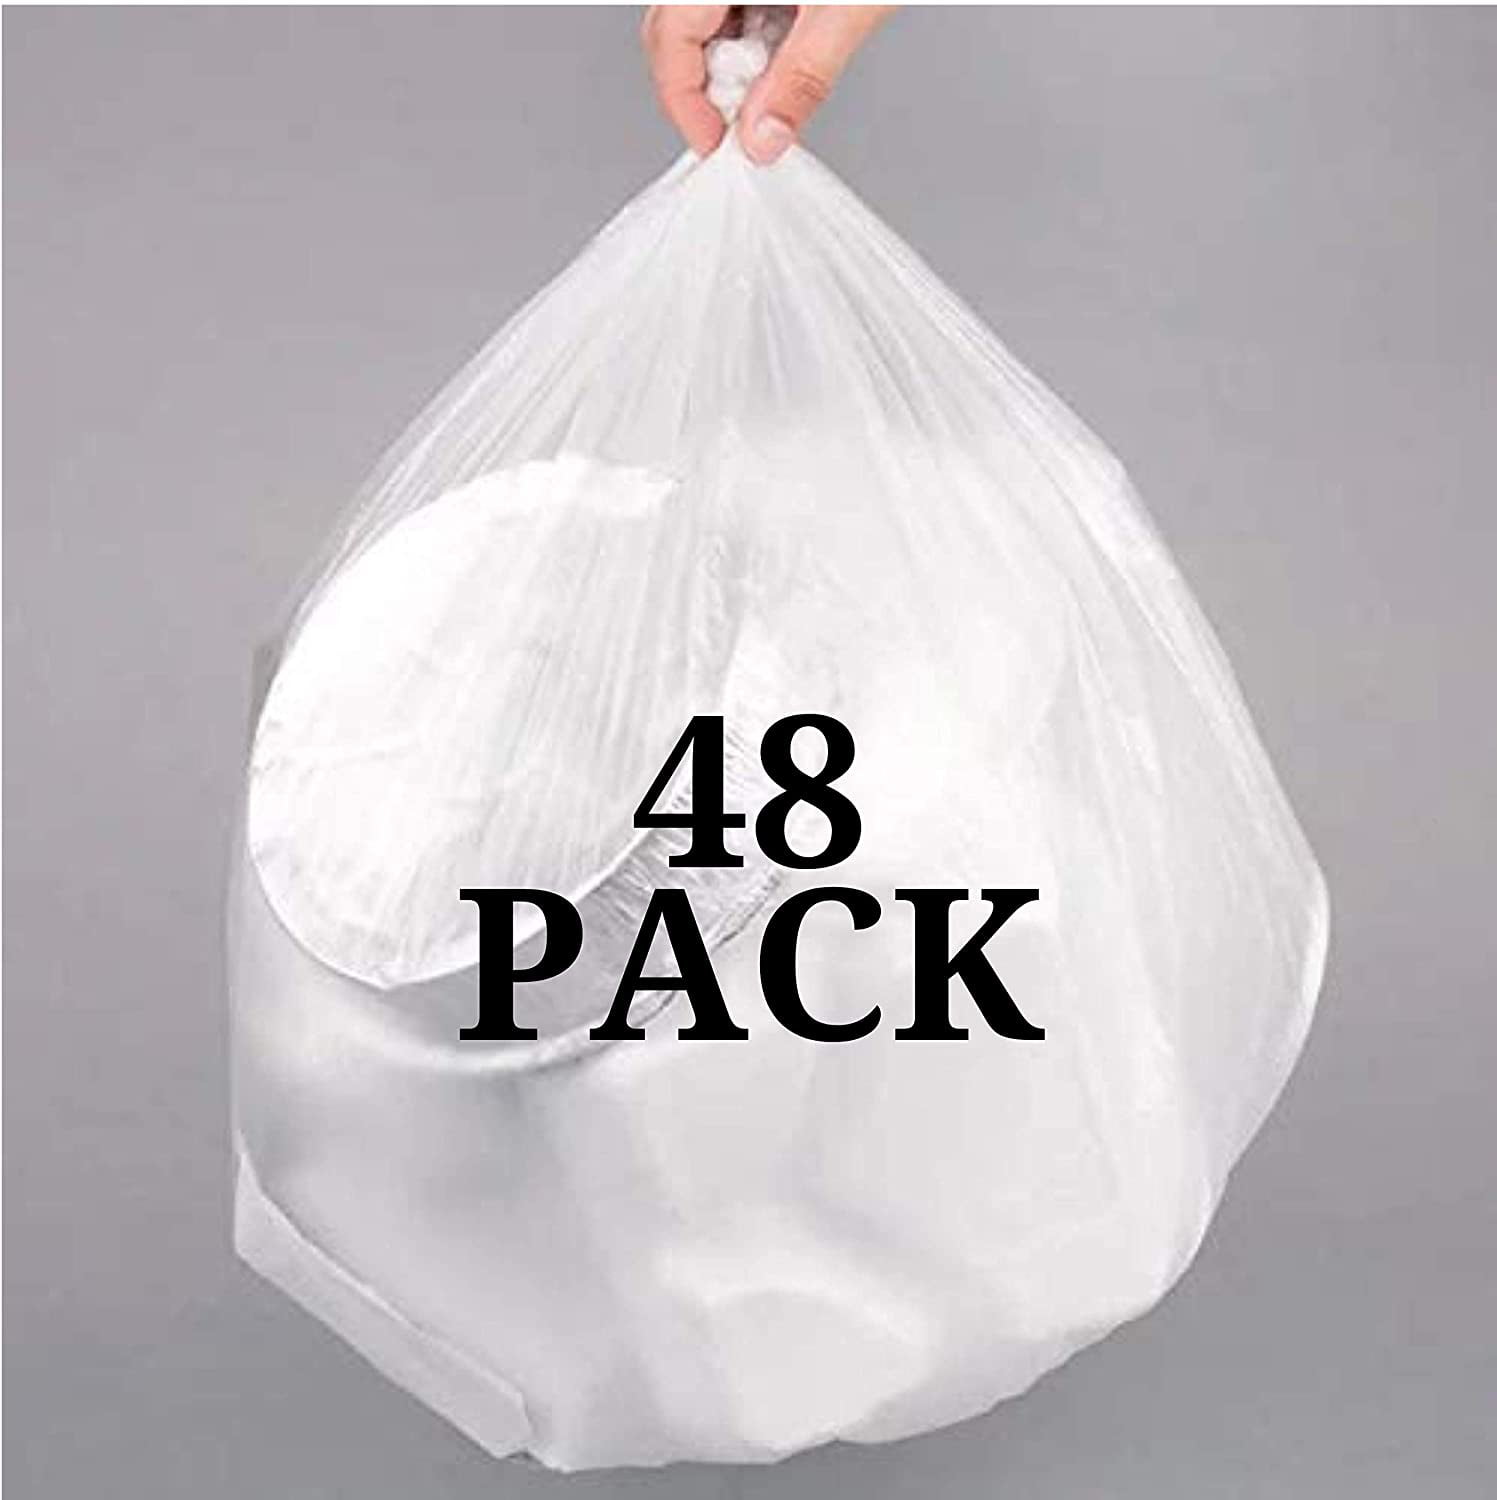 Small Trash Bags Kitchen Garbage Bags - 4 Gallon Clear Trash Bags Stro –  SPORT LIFE LLC